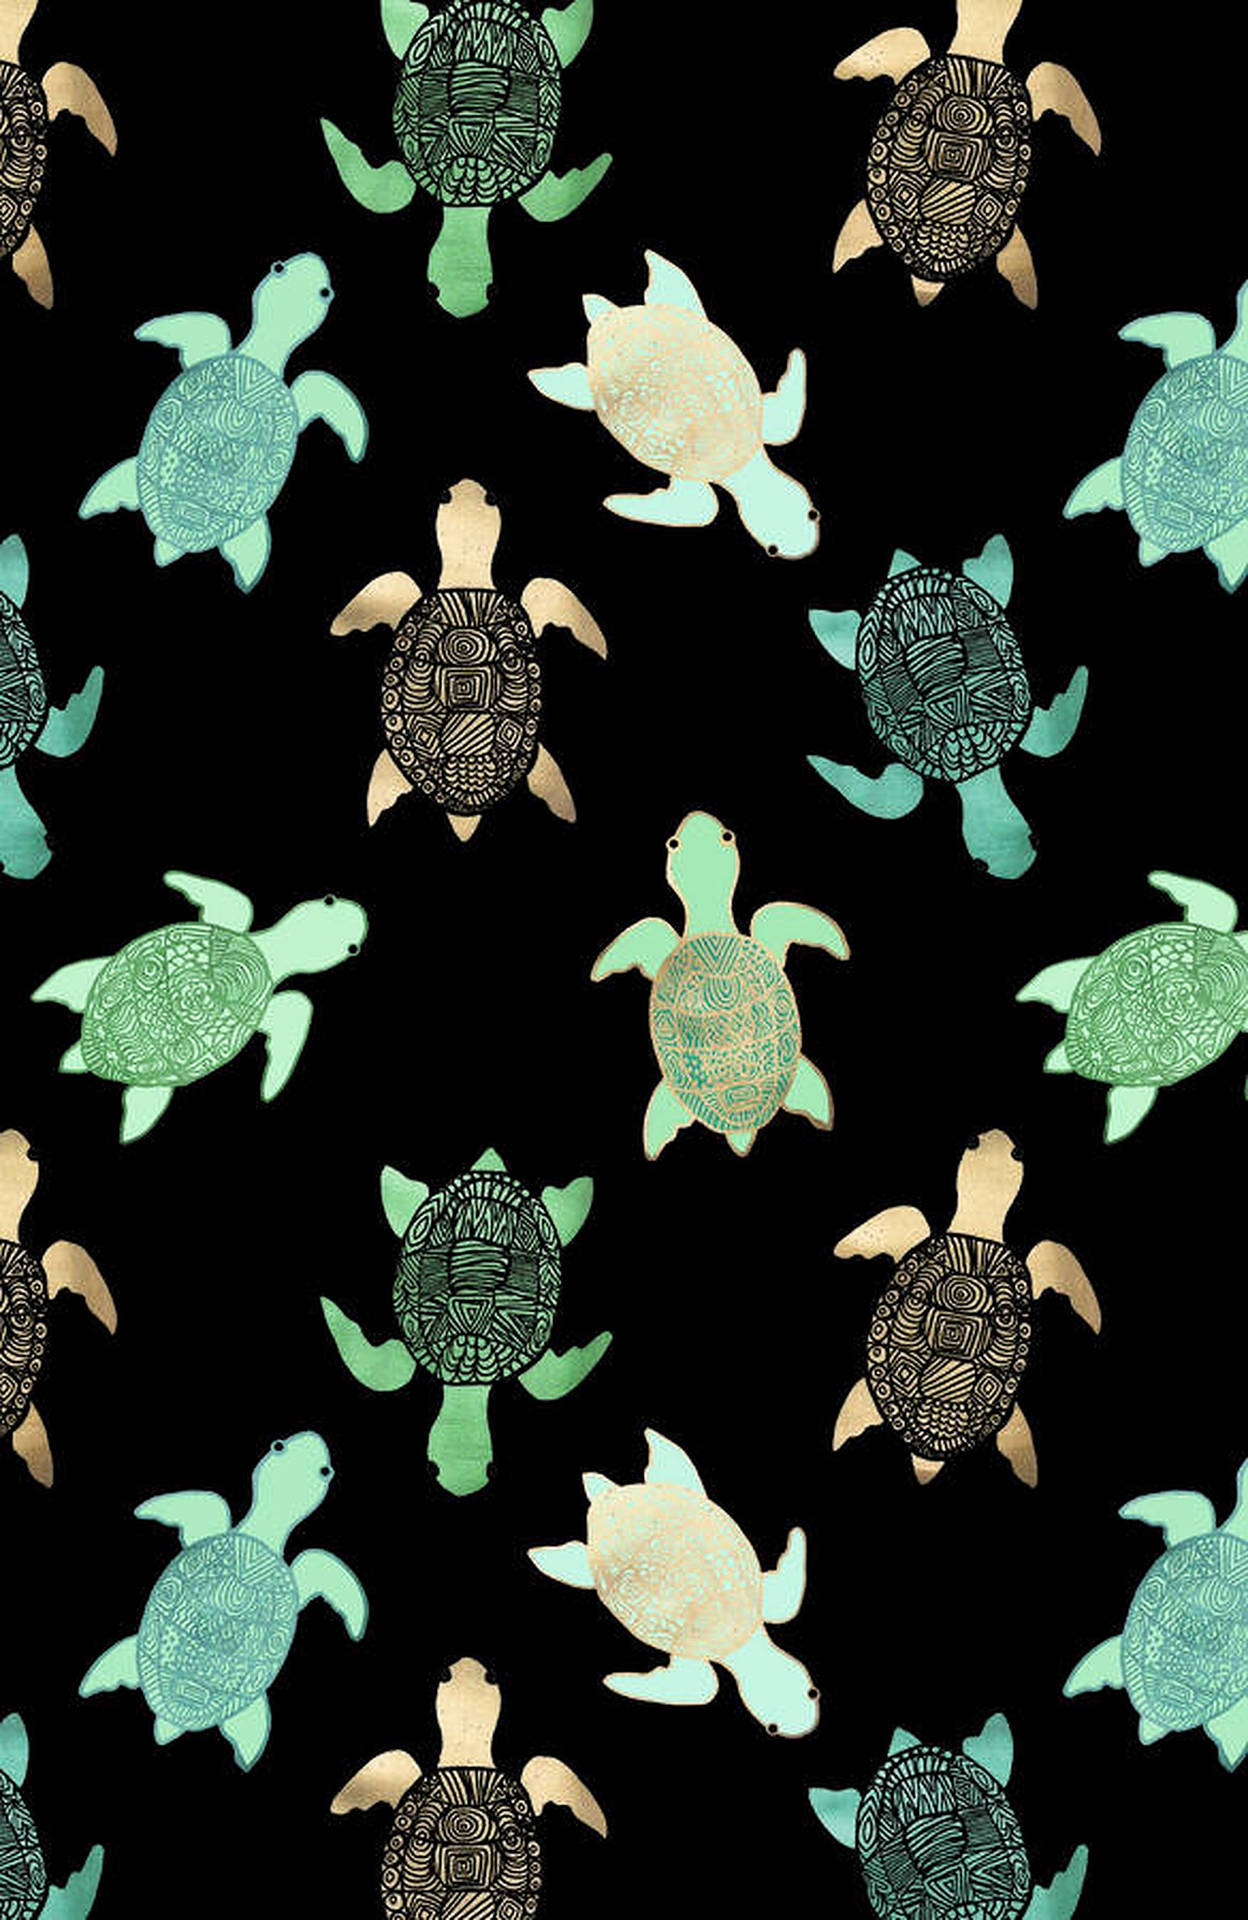 Glowing Turtle Black Poster Background